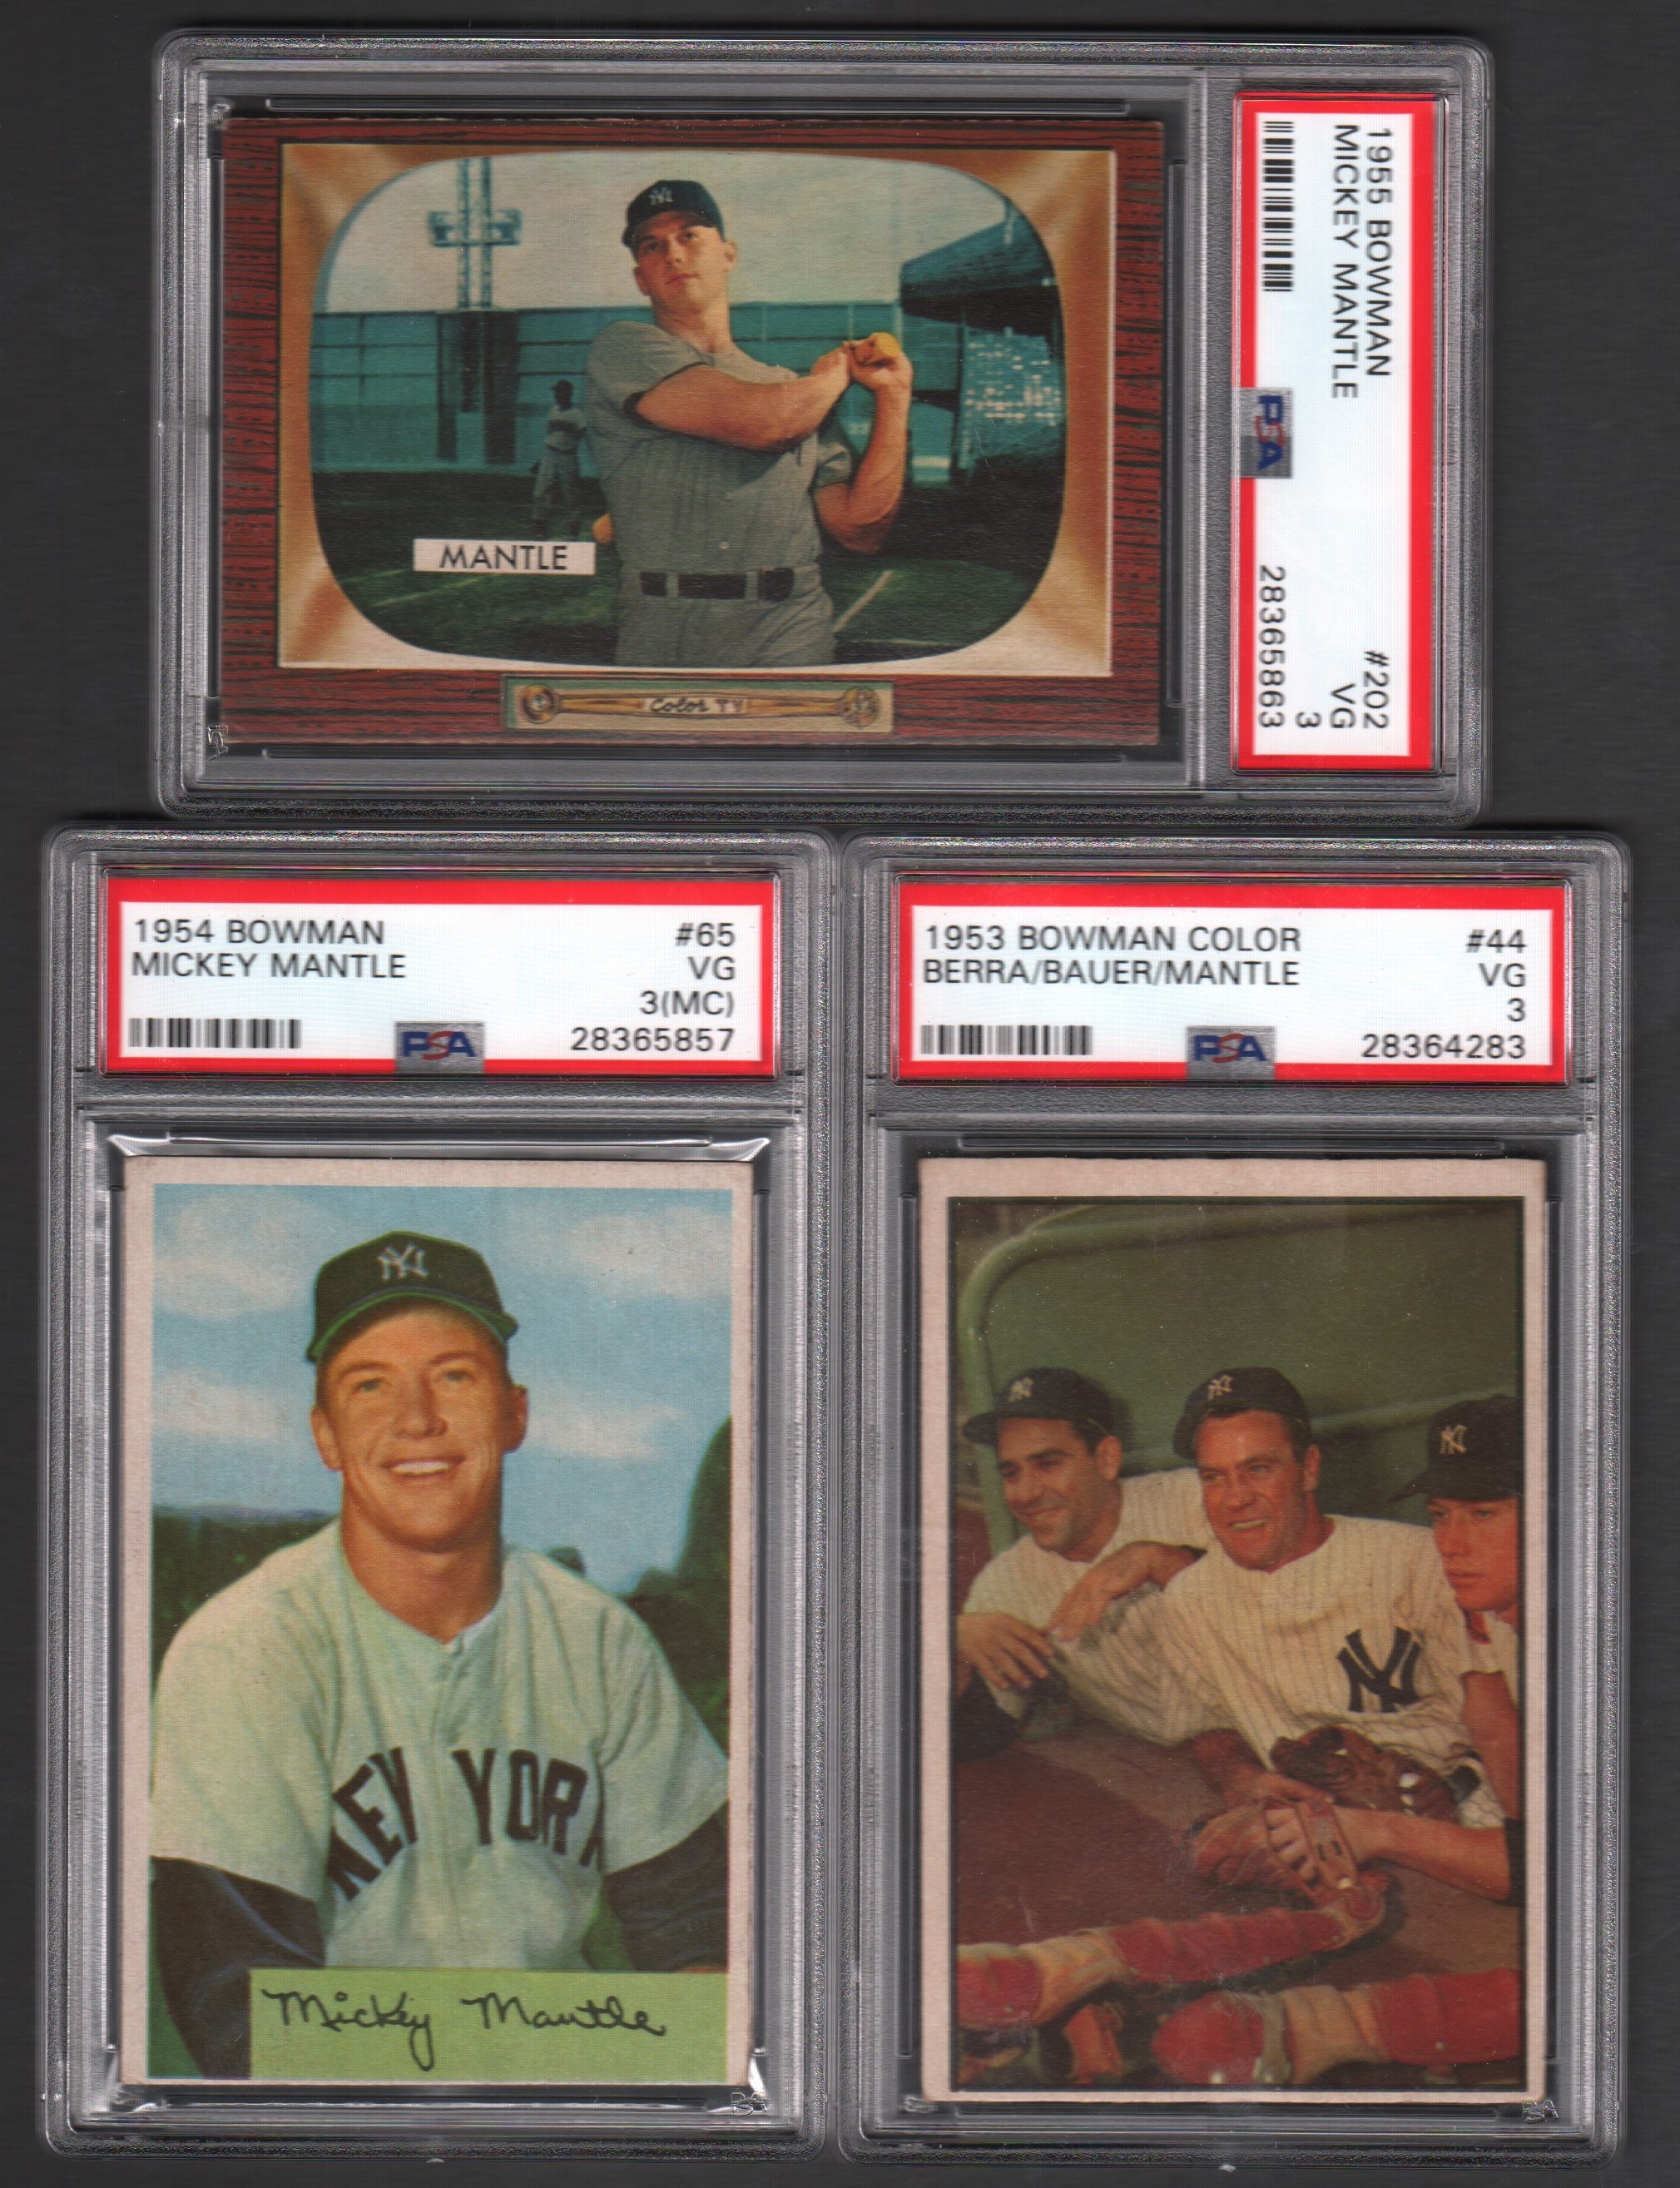 - 1953-1955 Bowman Mickey Mantle PSA Graded Collection of THREE Cards